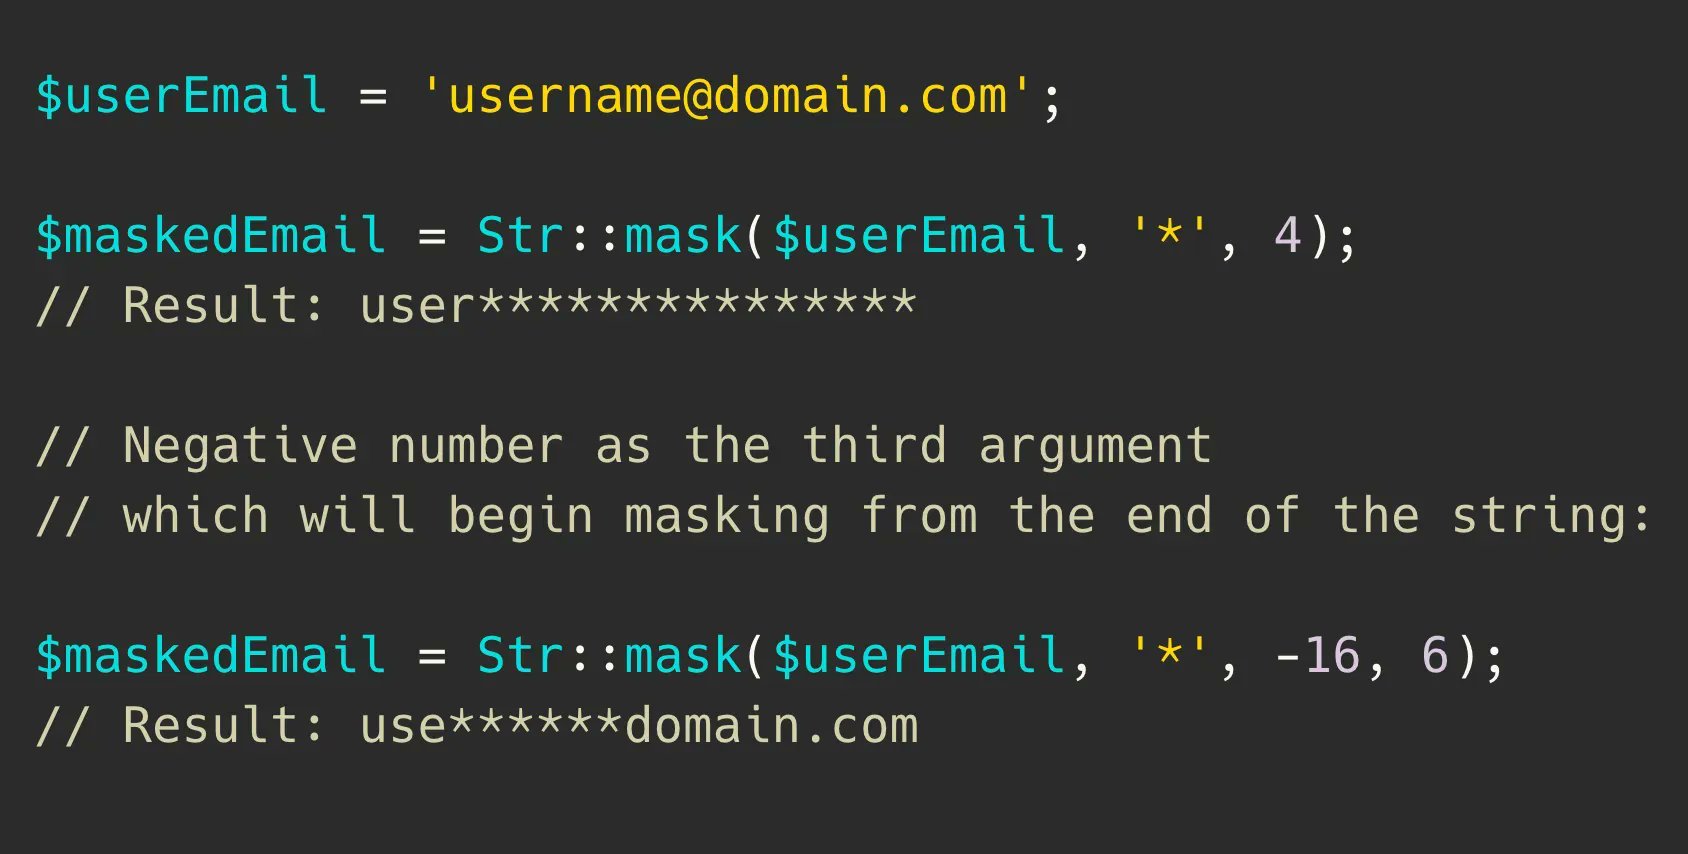 `Str::mask()` lets you mask a portion of a string with a character (e.g. *)